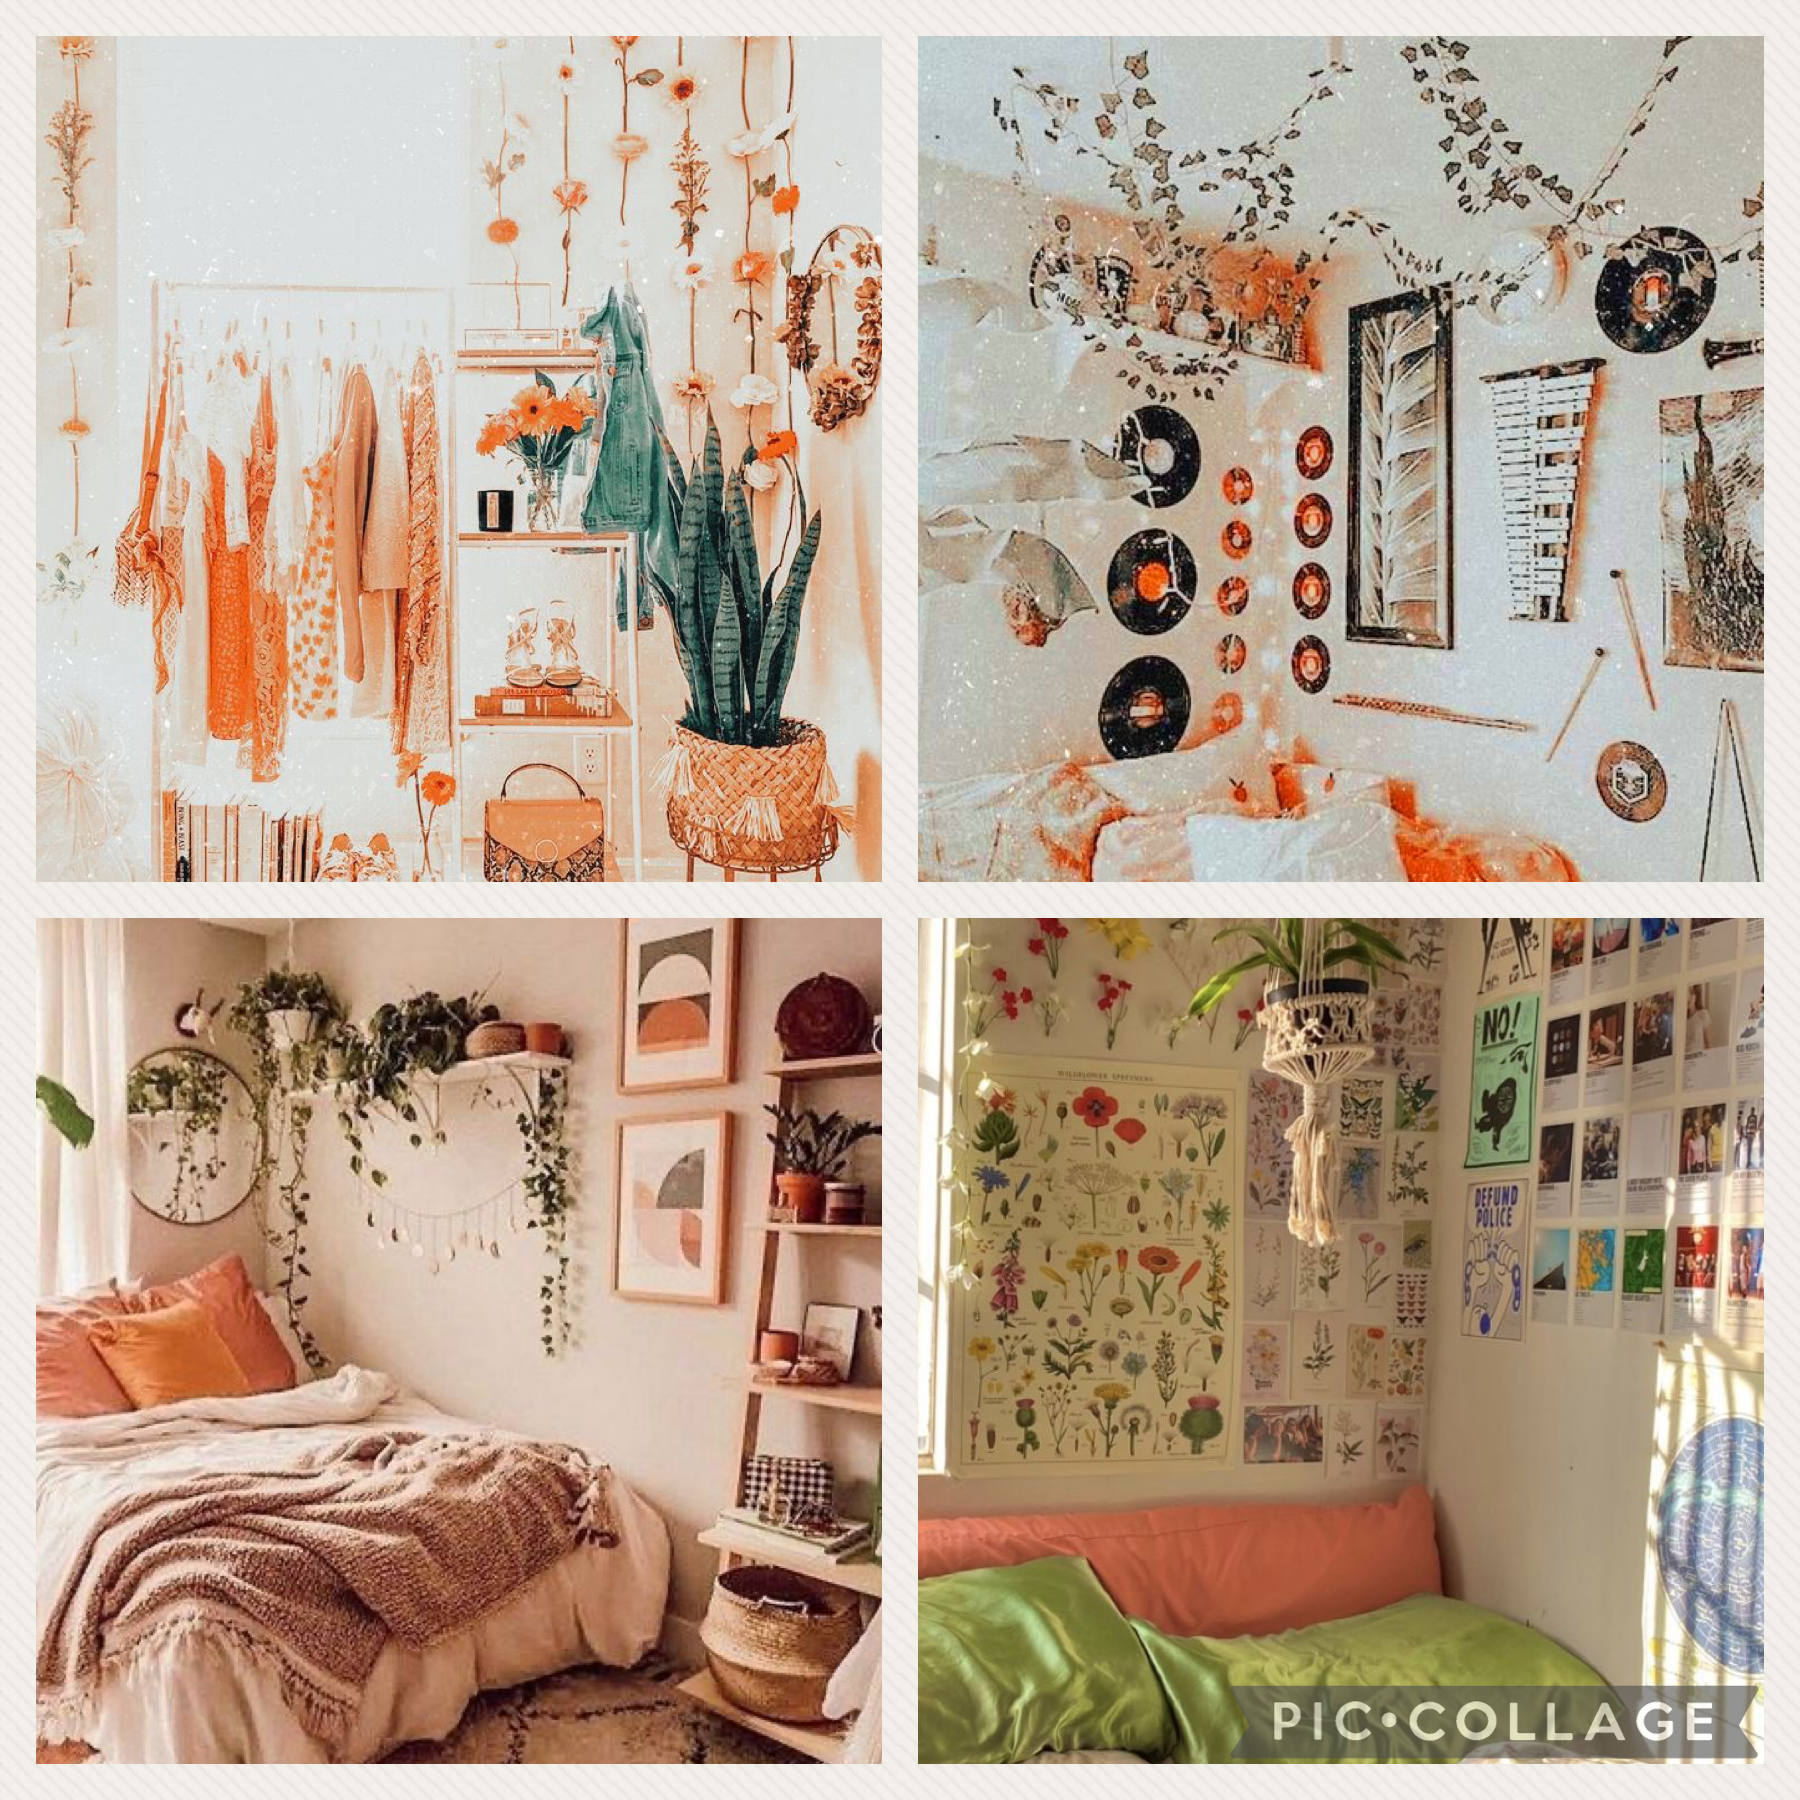 what aesthetic should my room look like??